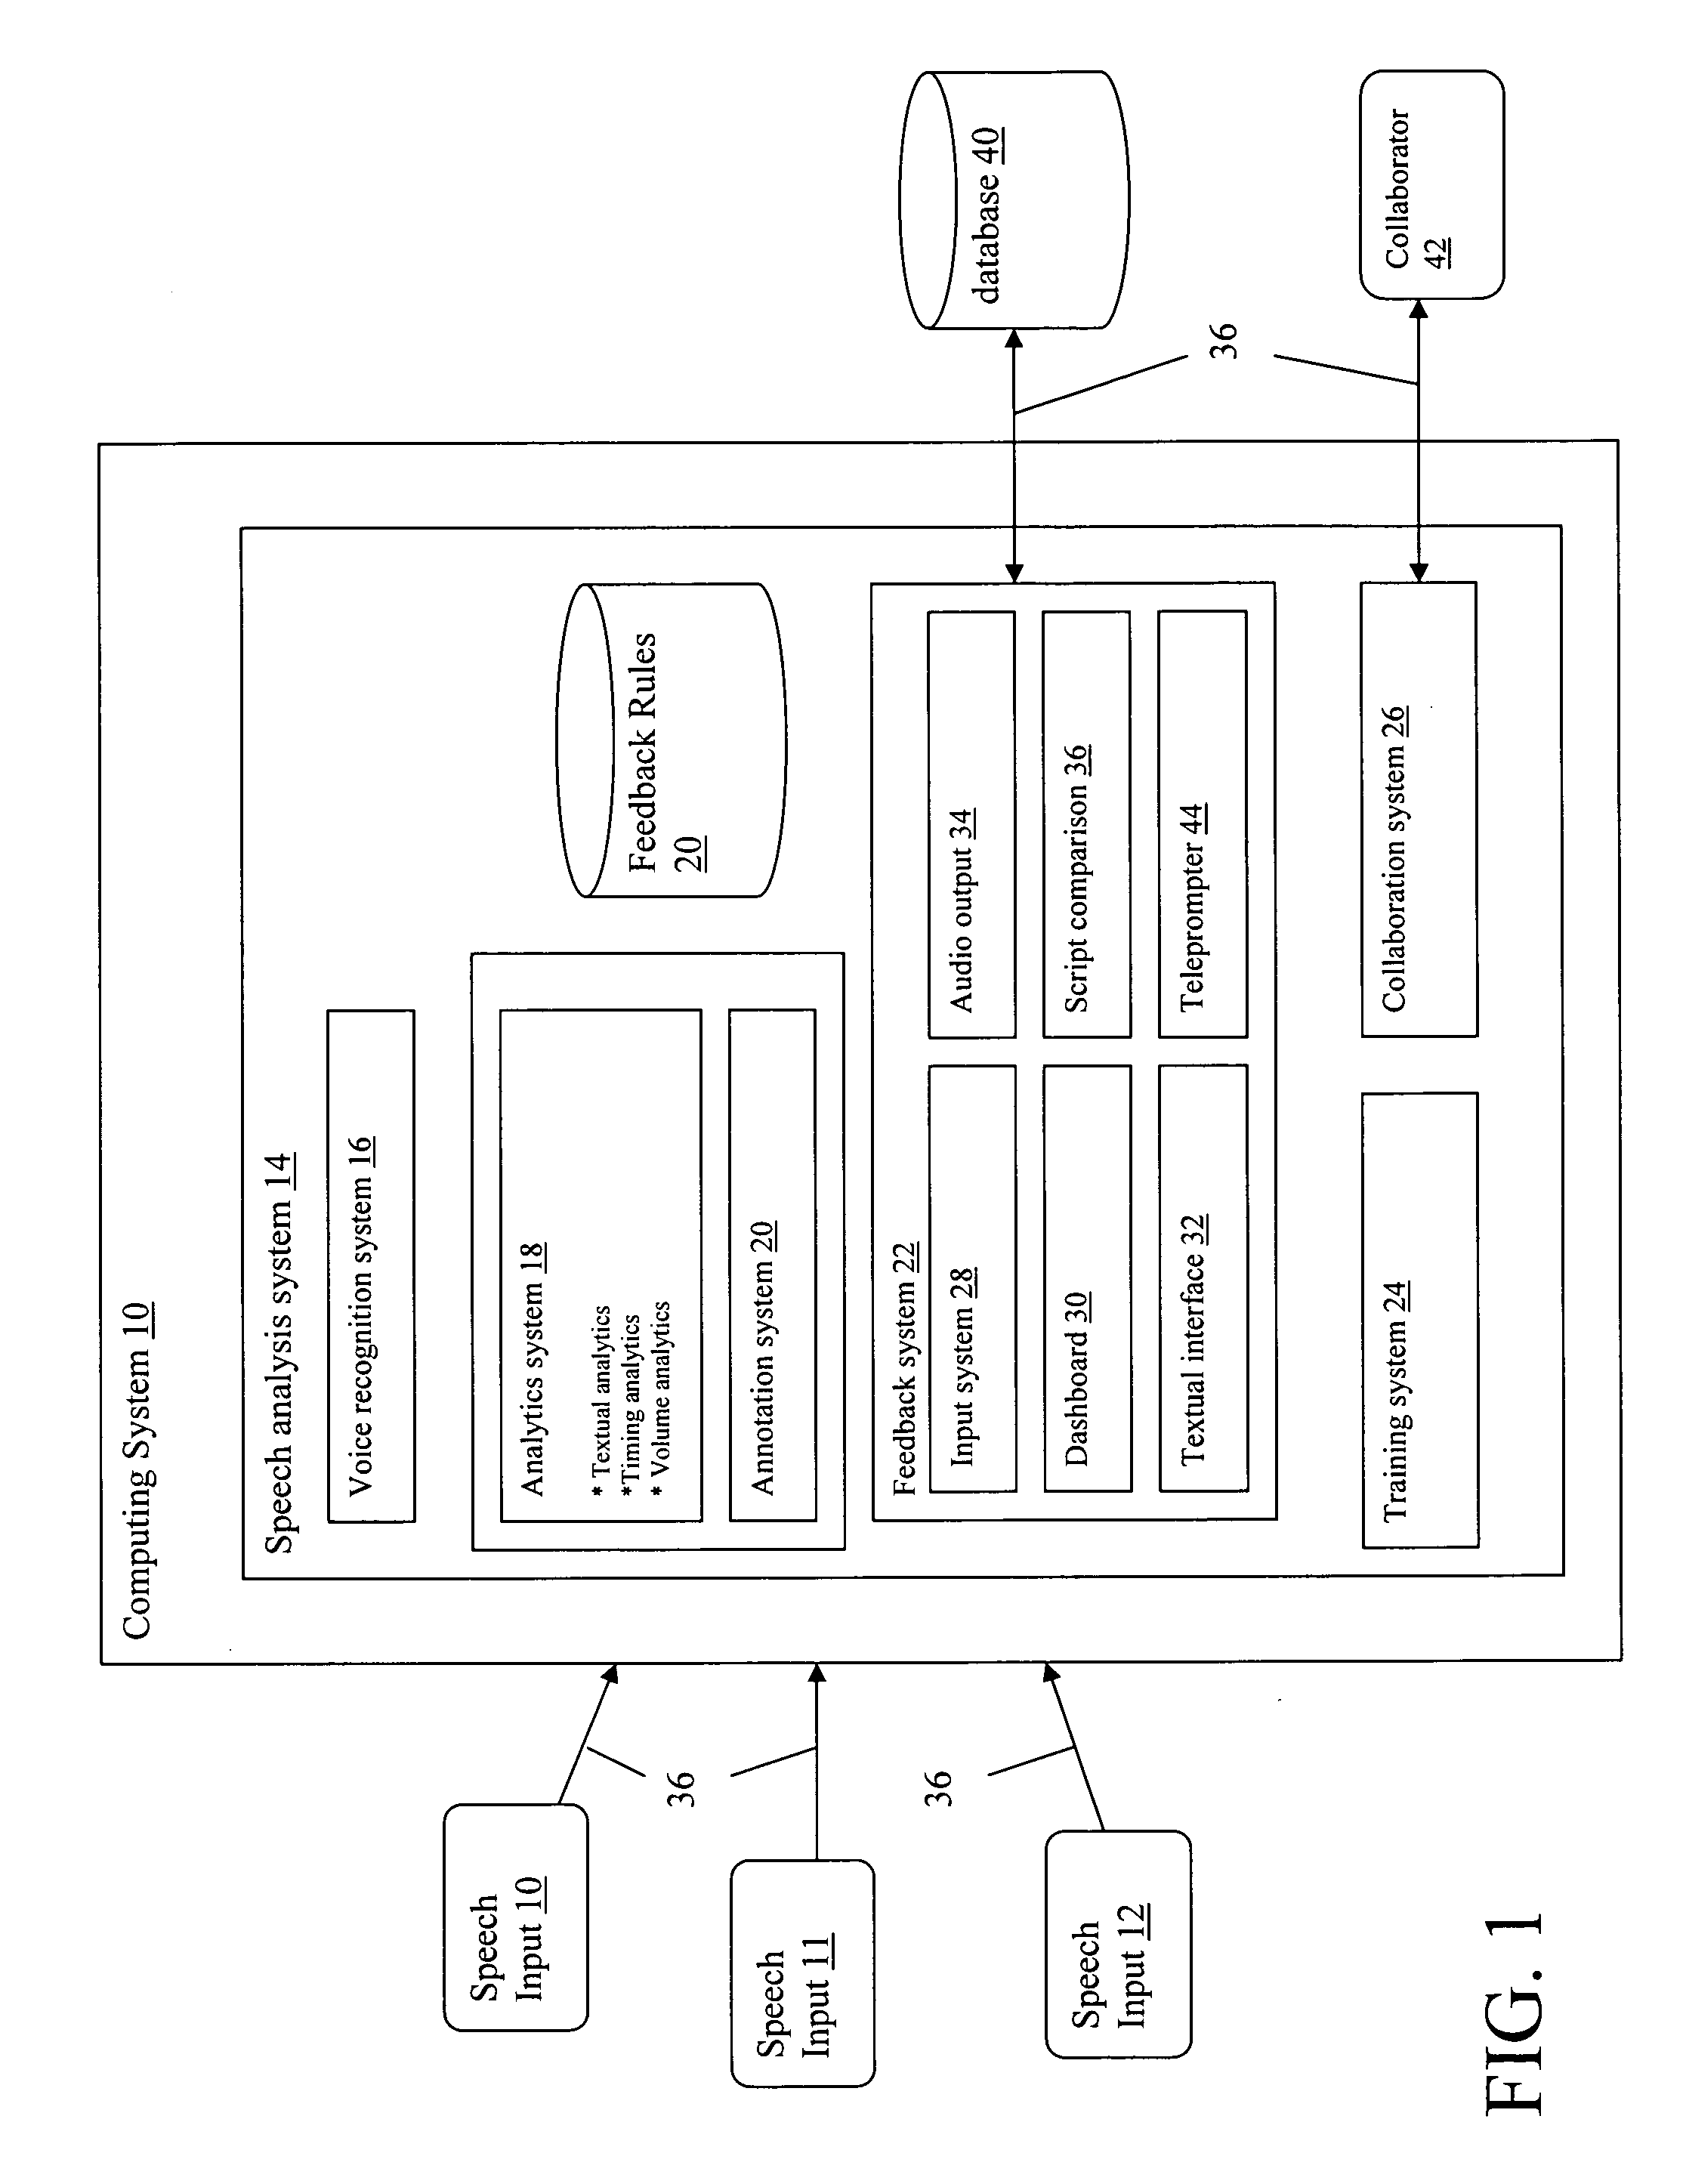 System and method for improving speaking ability